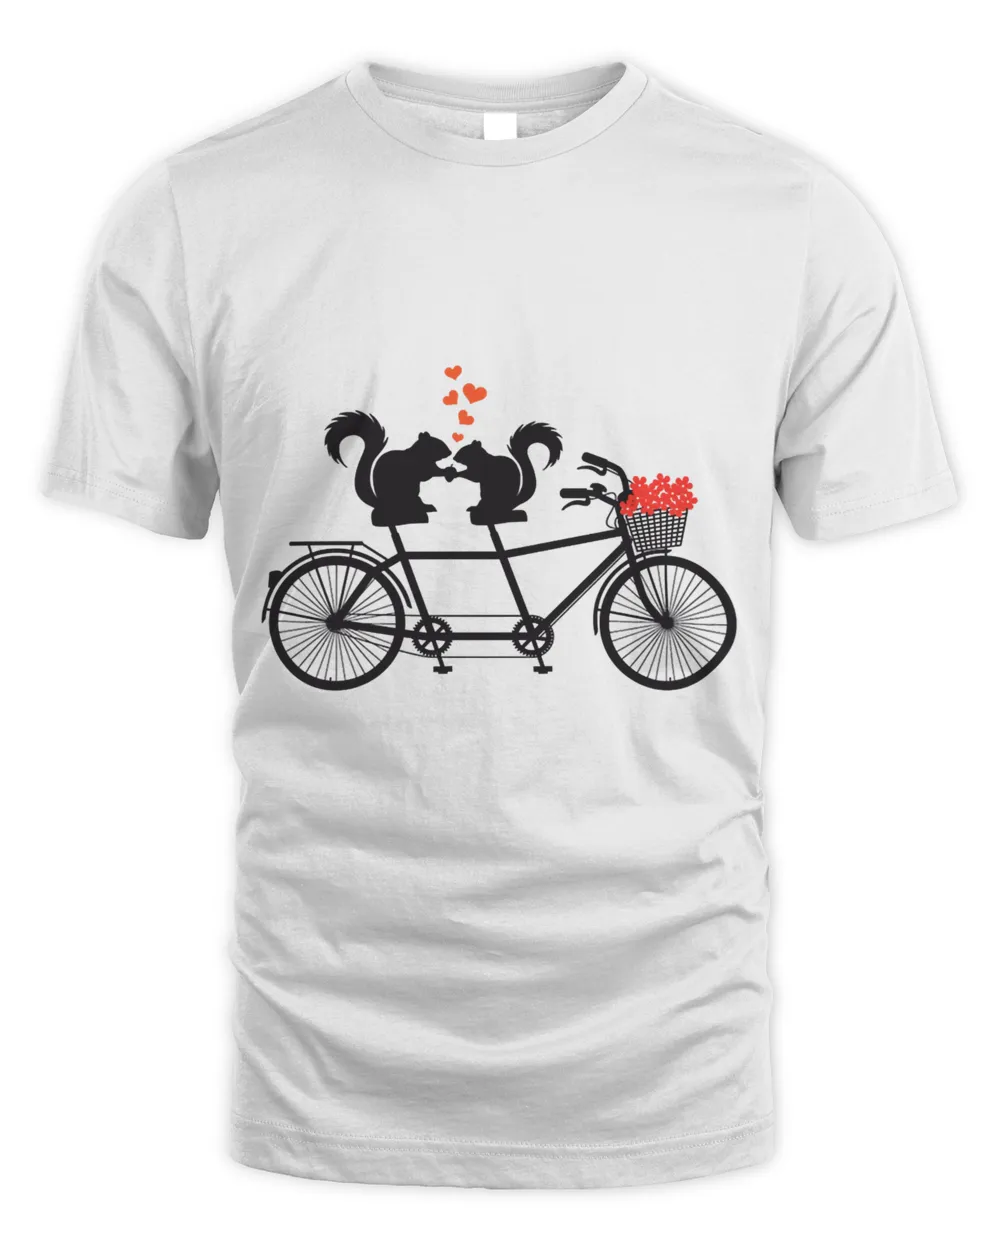 tandem bicycle with squirrels Classic T-Shirt